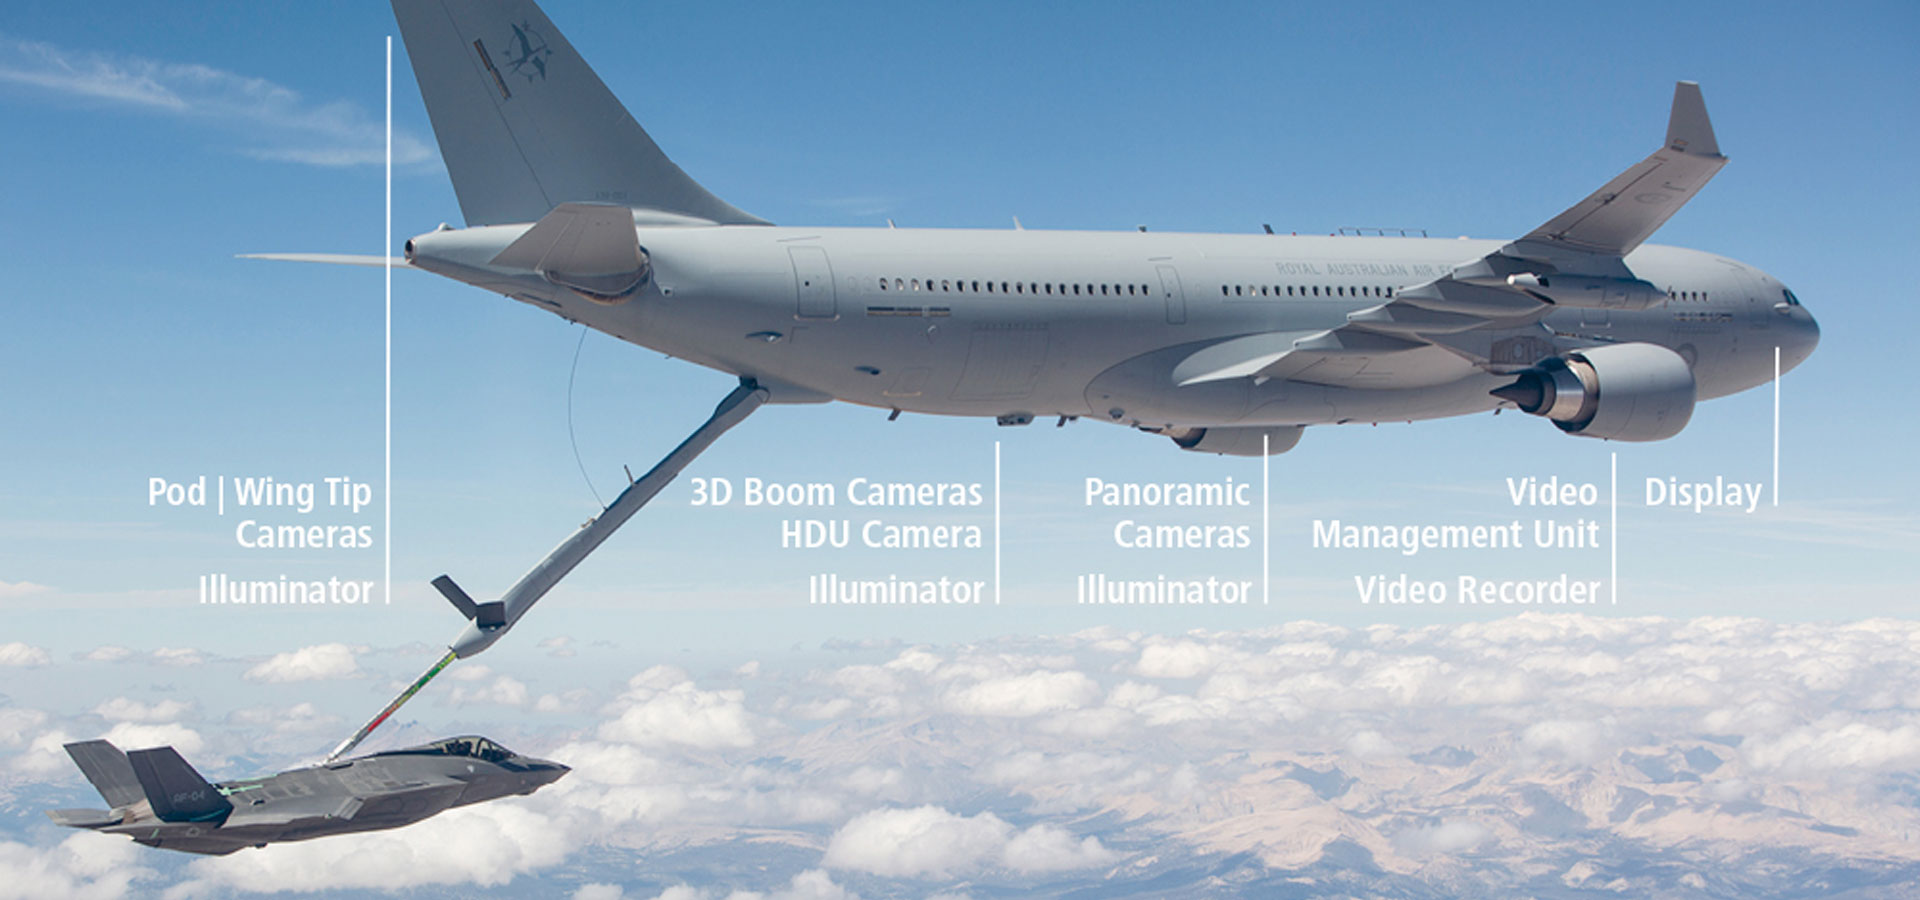 Kappa optronics for Air to Air Refueling for the airbus MRTT 400